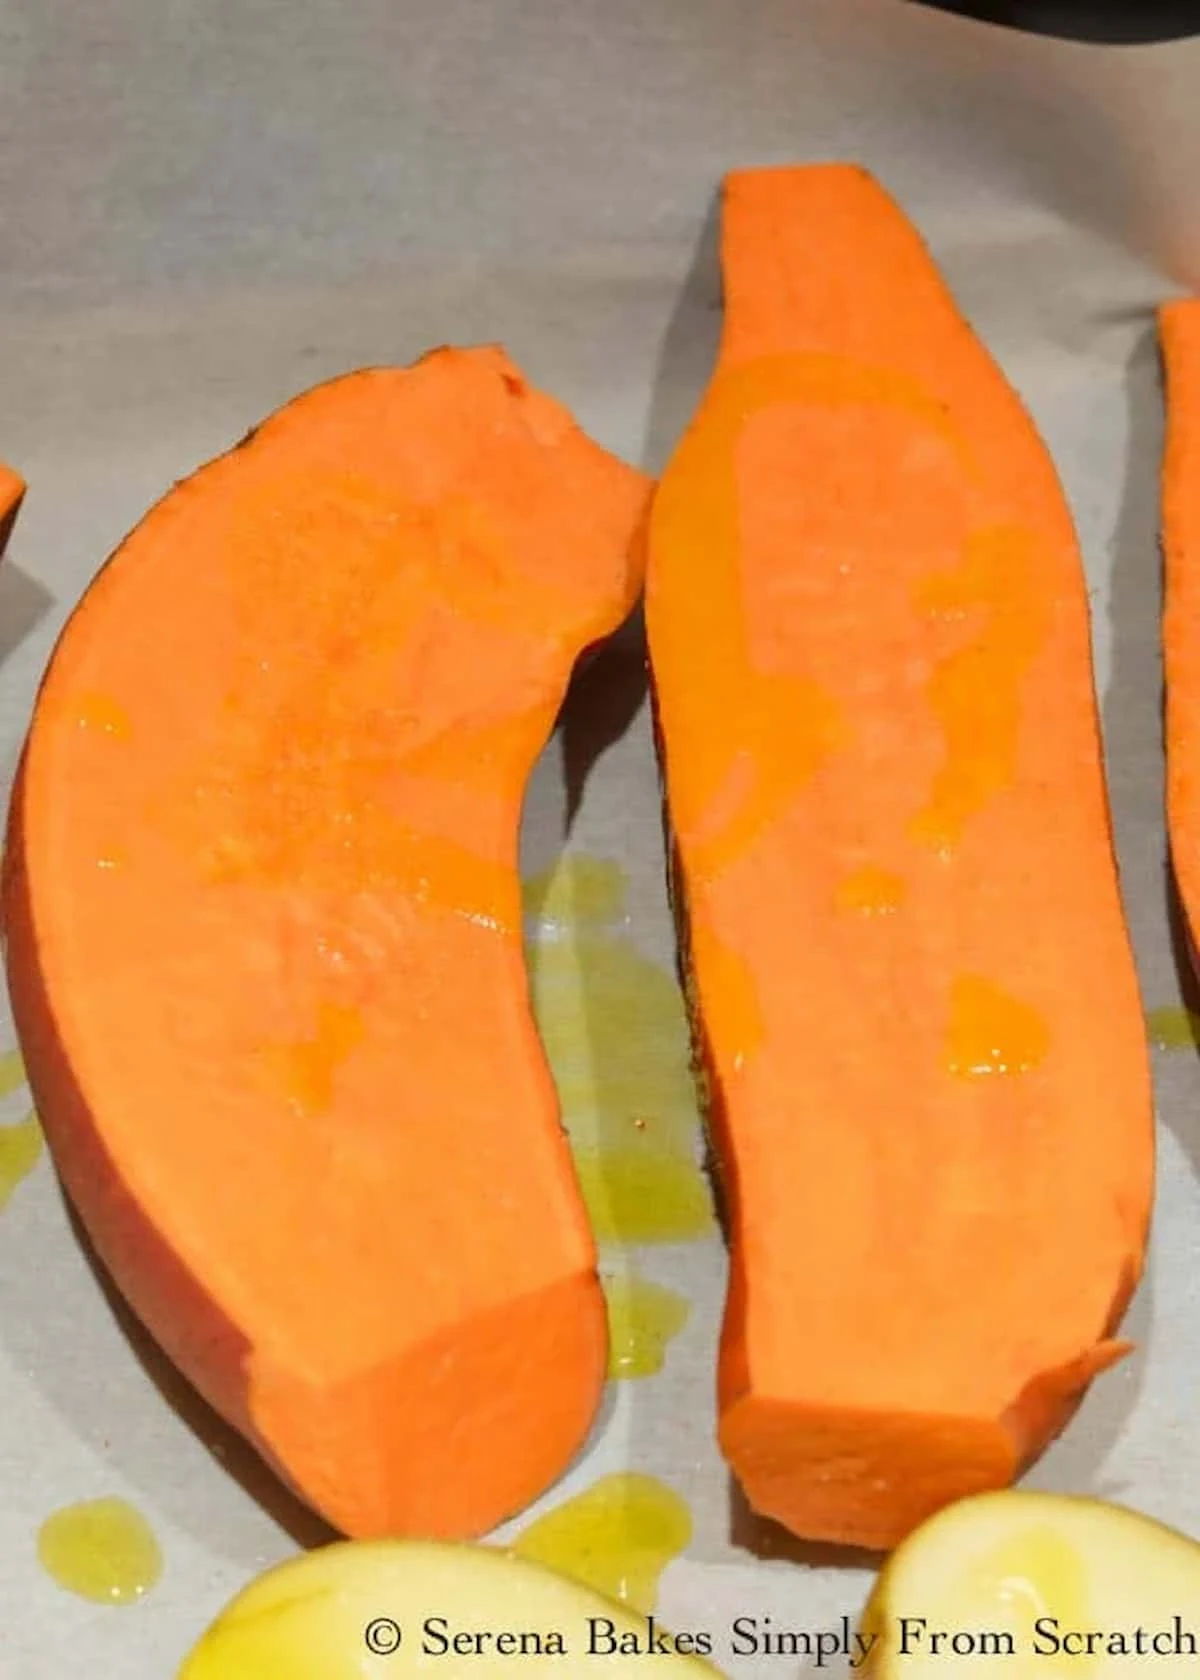 Sweet Potatoes sliced in half and drizzled with olive oil on a parchment lined baking sheet.